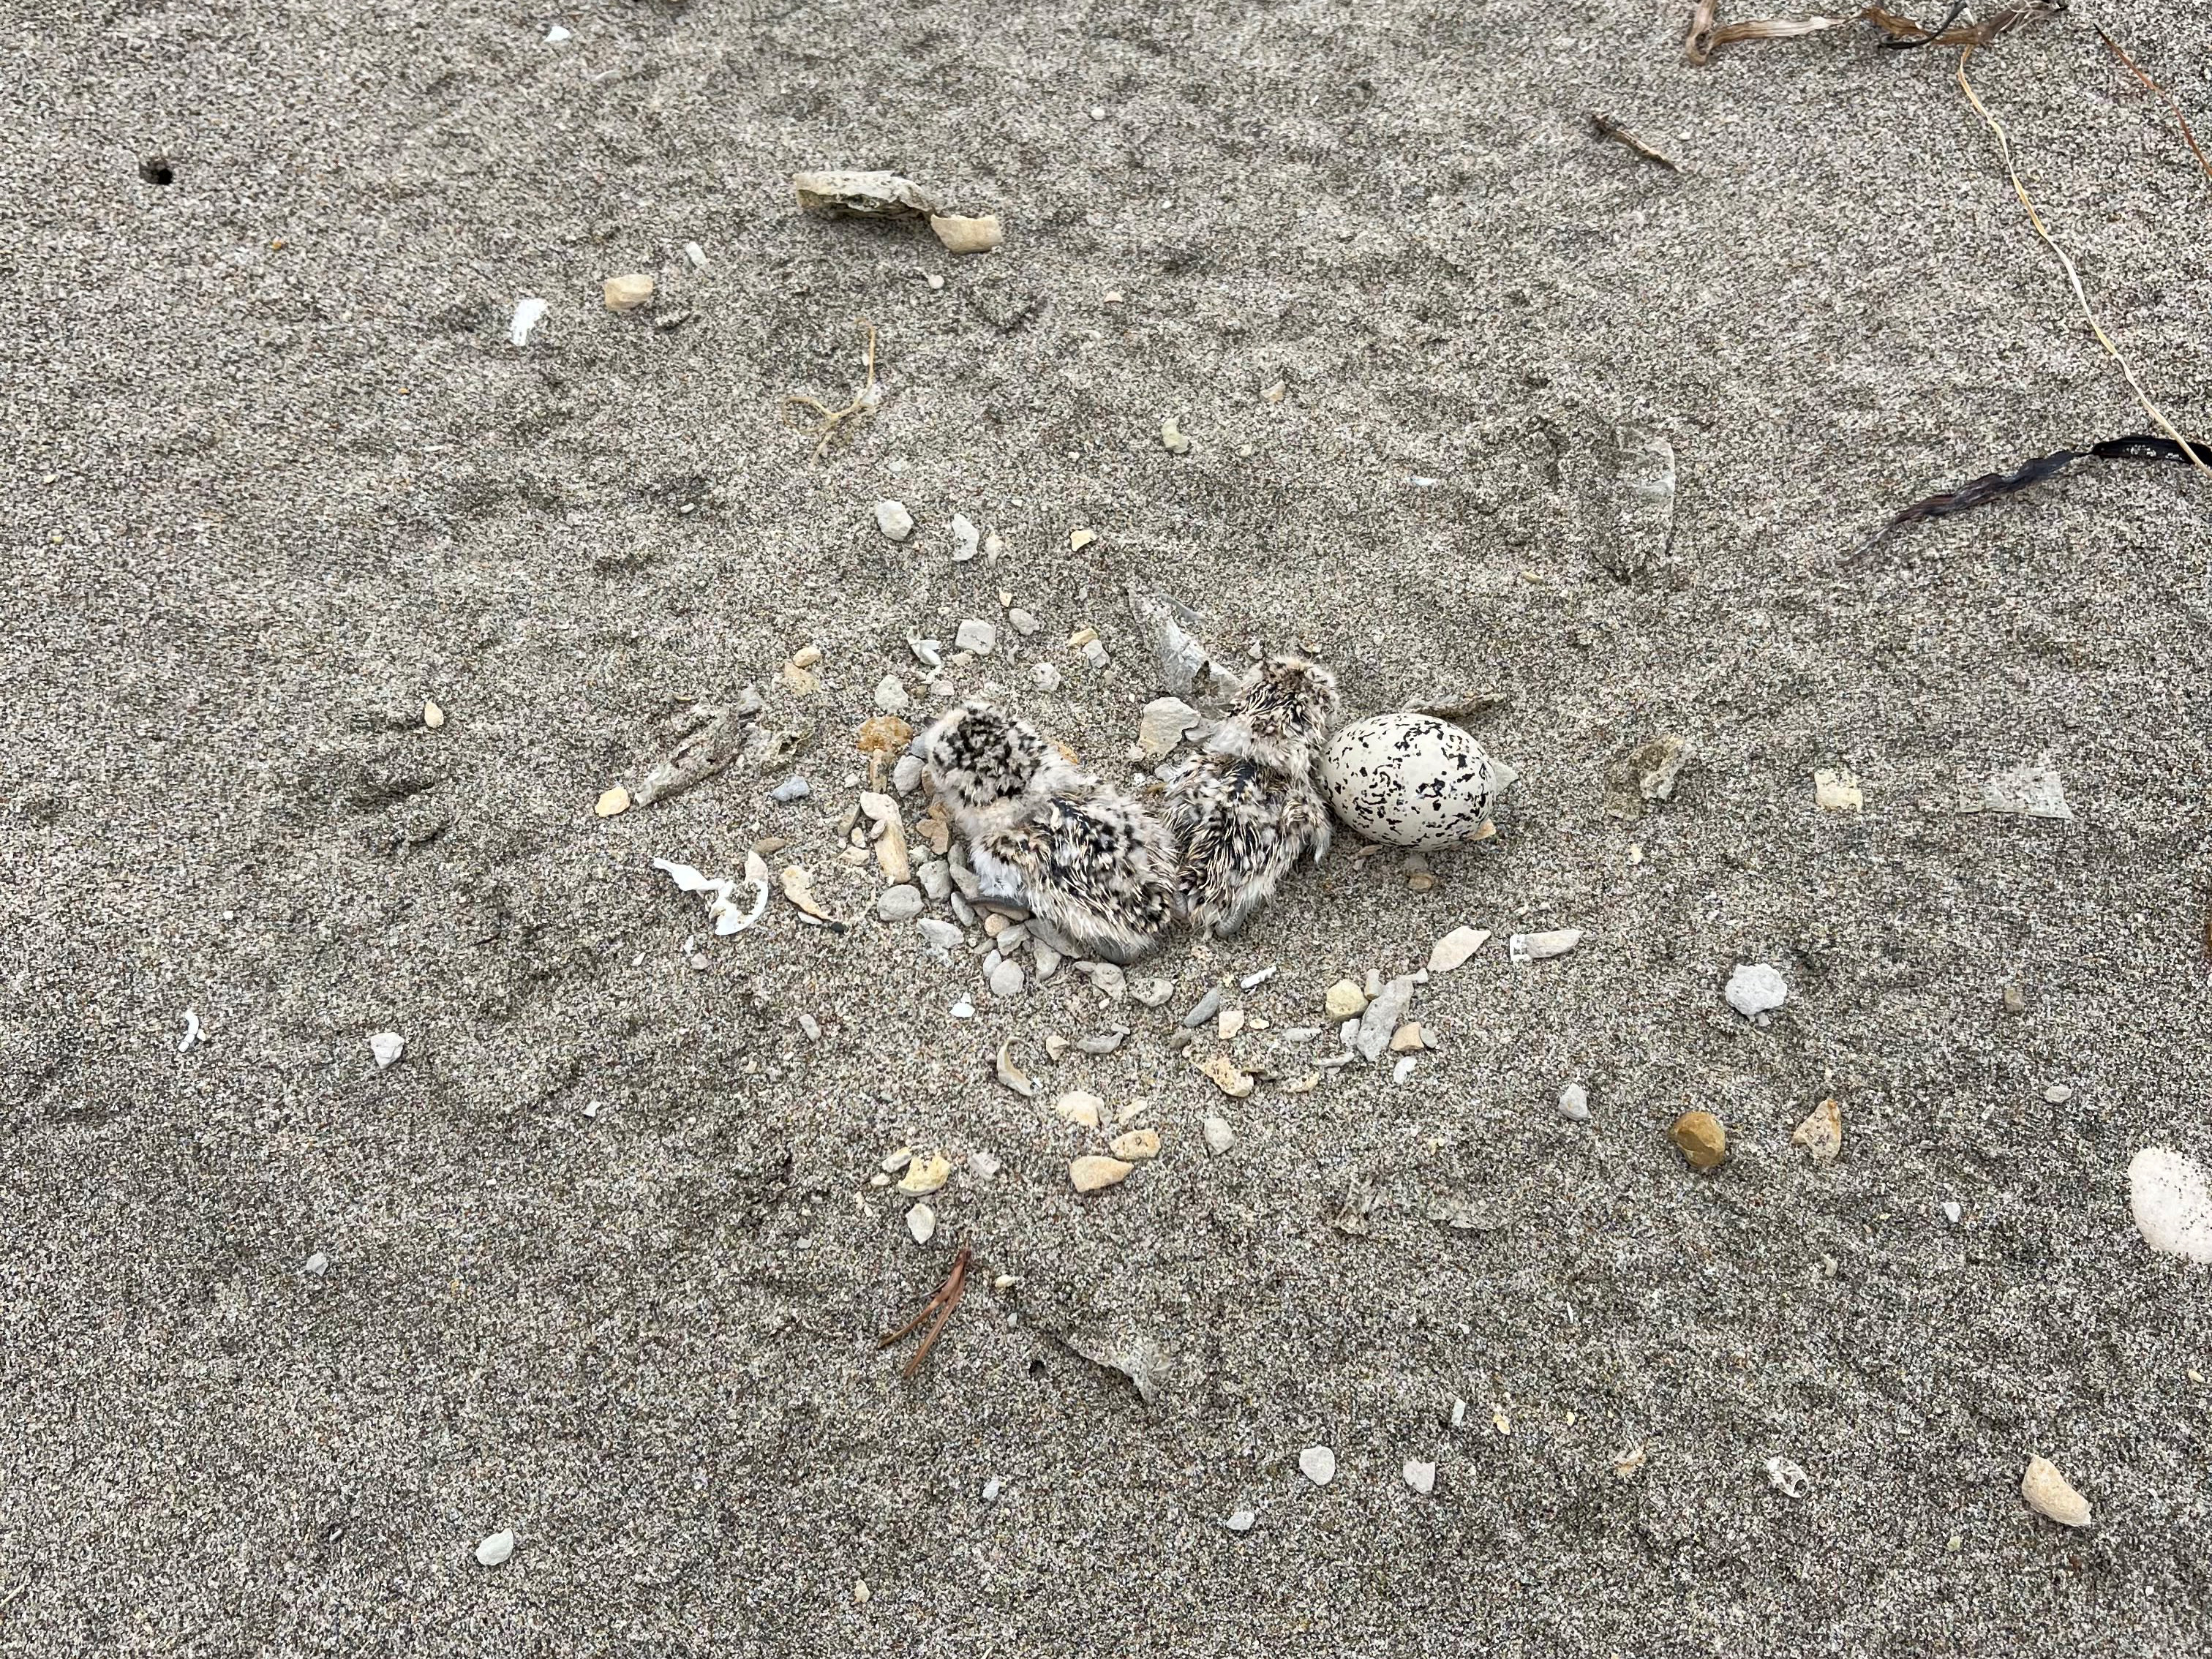 A photo of two small black-speckled, beige-colored, newly-hatched shorebird chicks and a small black-speckled, beige-colored egg sitting on sand among small bits of rocks.